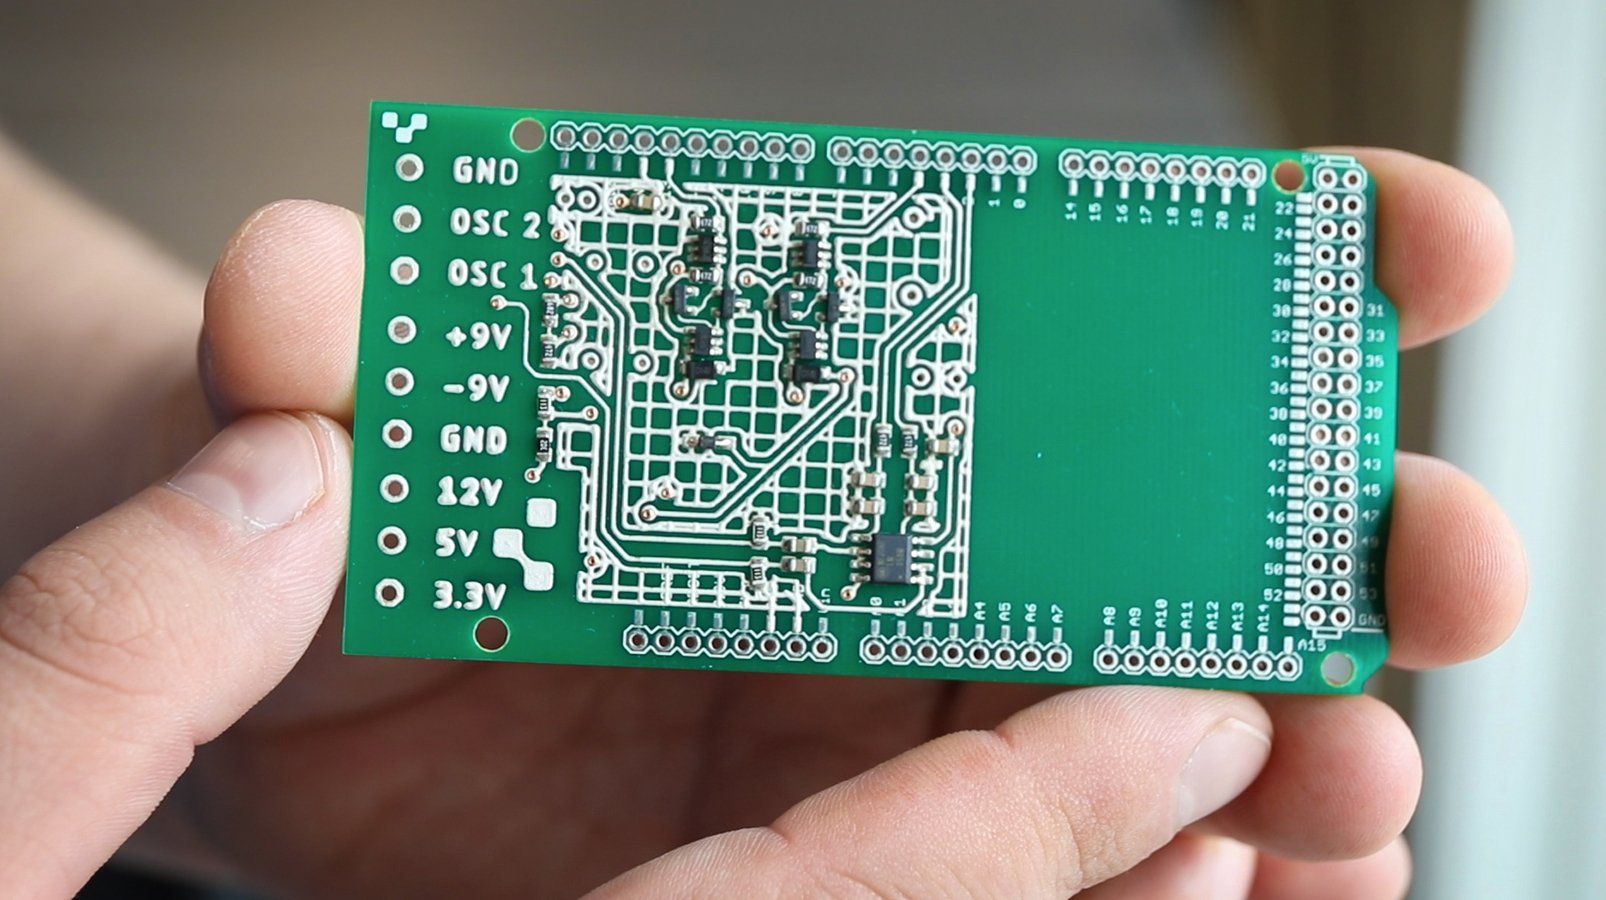 Genoptag milits brændt 3D Print PCBs (3D Printed Circuit Boards) – All You Need to Know | All3DP  Pro